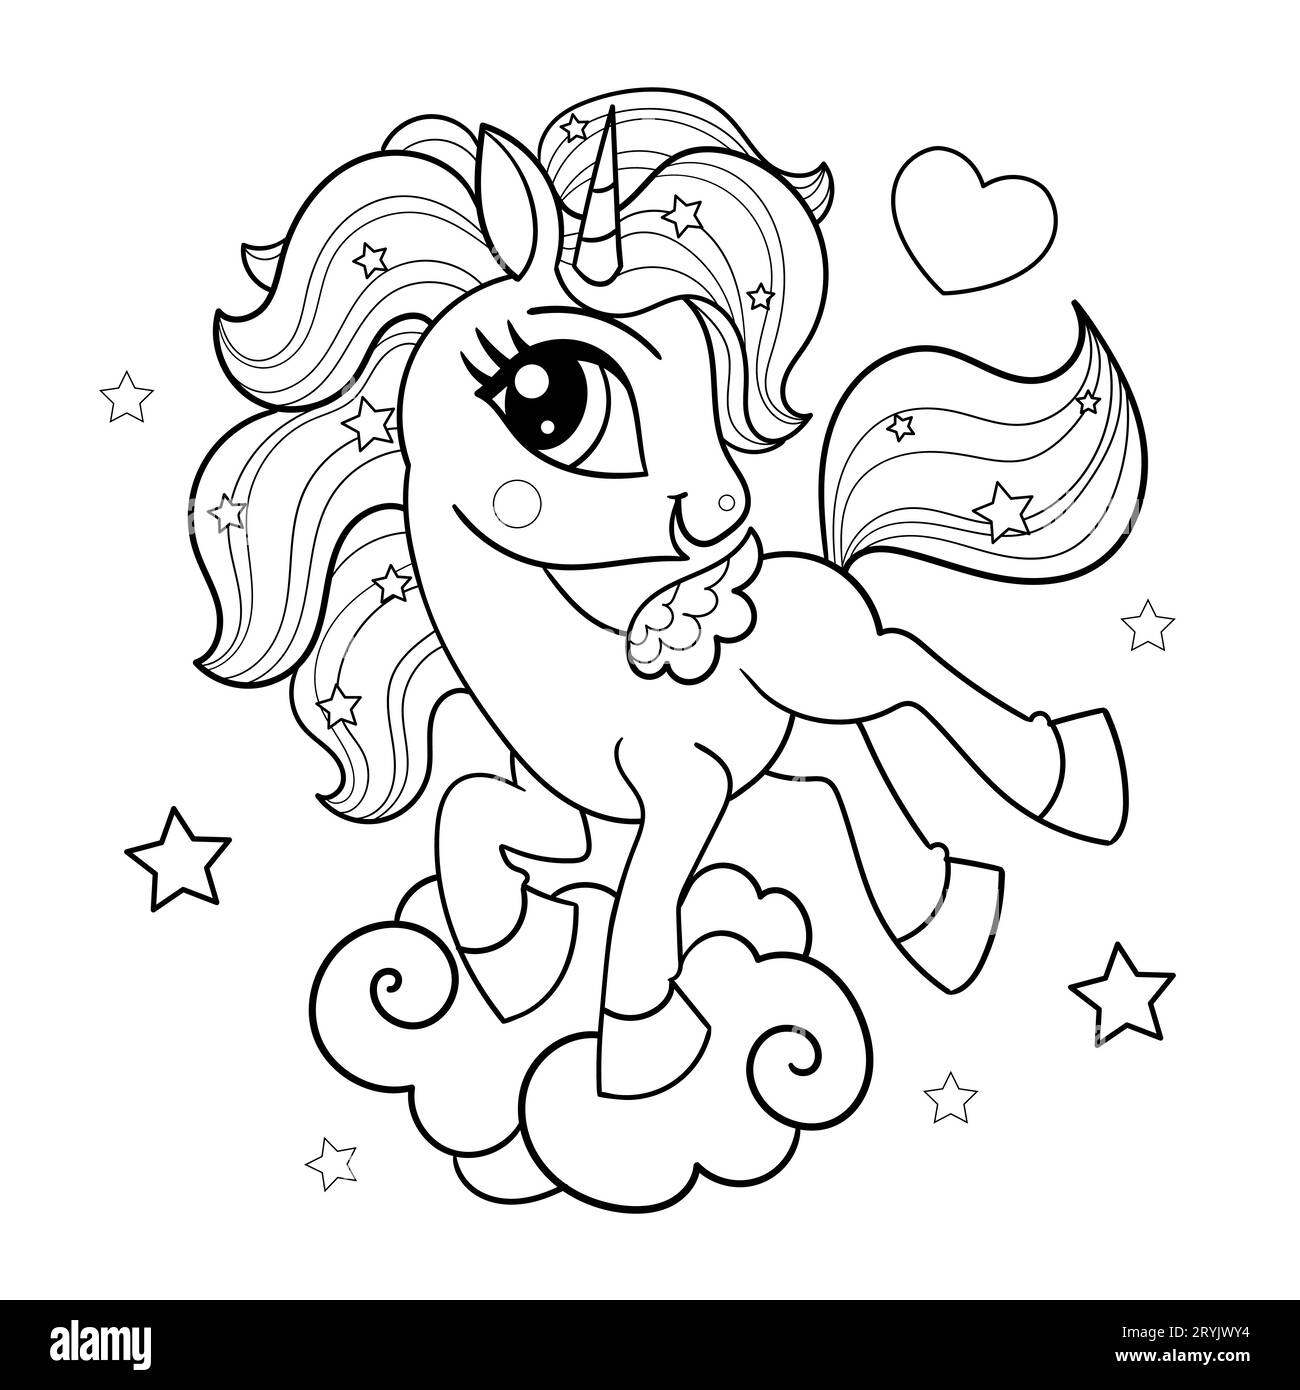 Cute cartoon unicorn on a cloud. Black and white illustration. For children's design of coloring books, prints, posters, cards, stickers, puzzles, etc Stock Vector